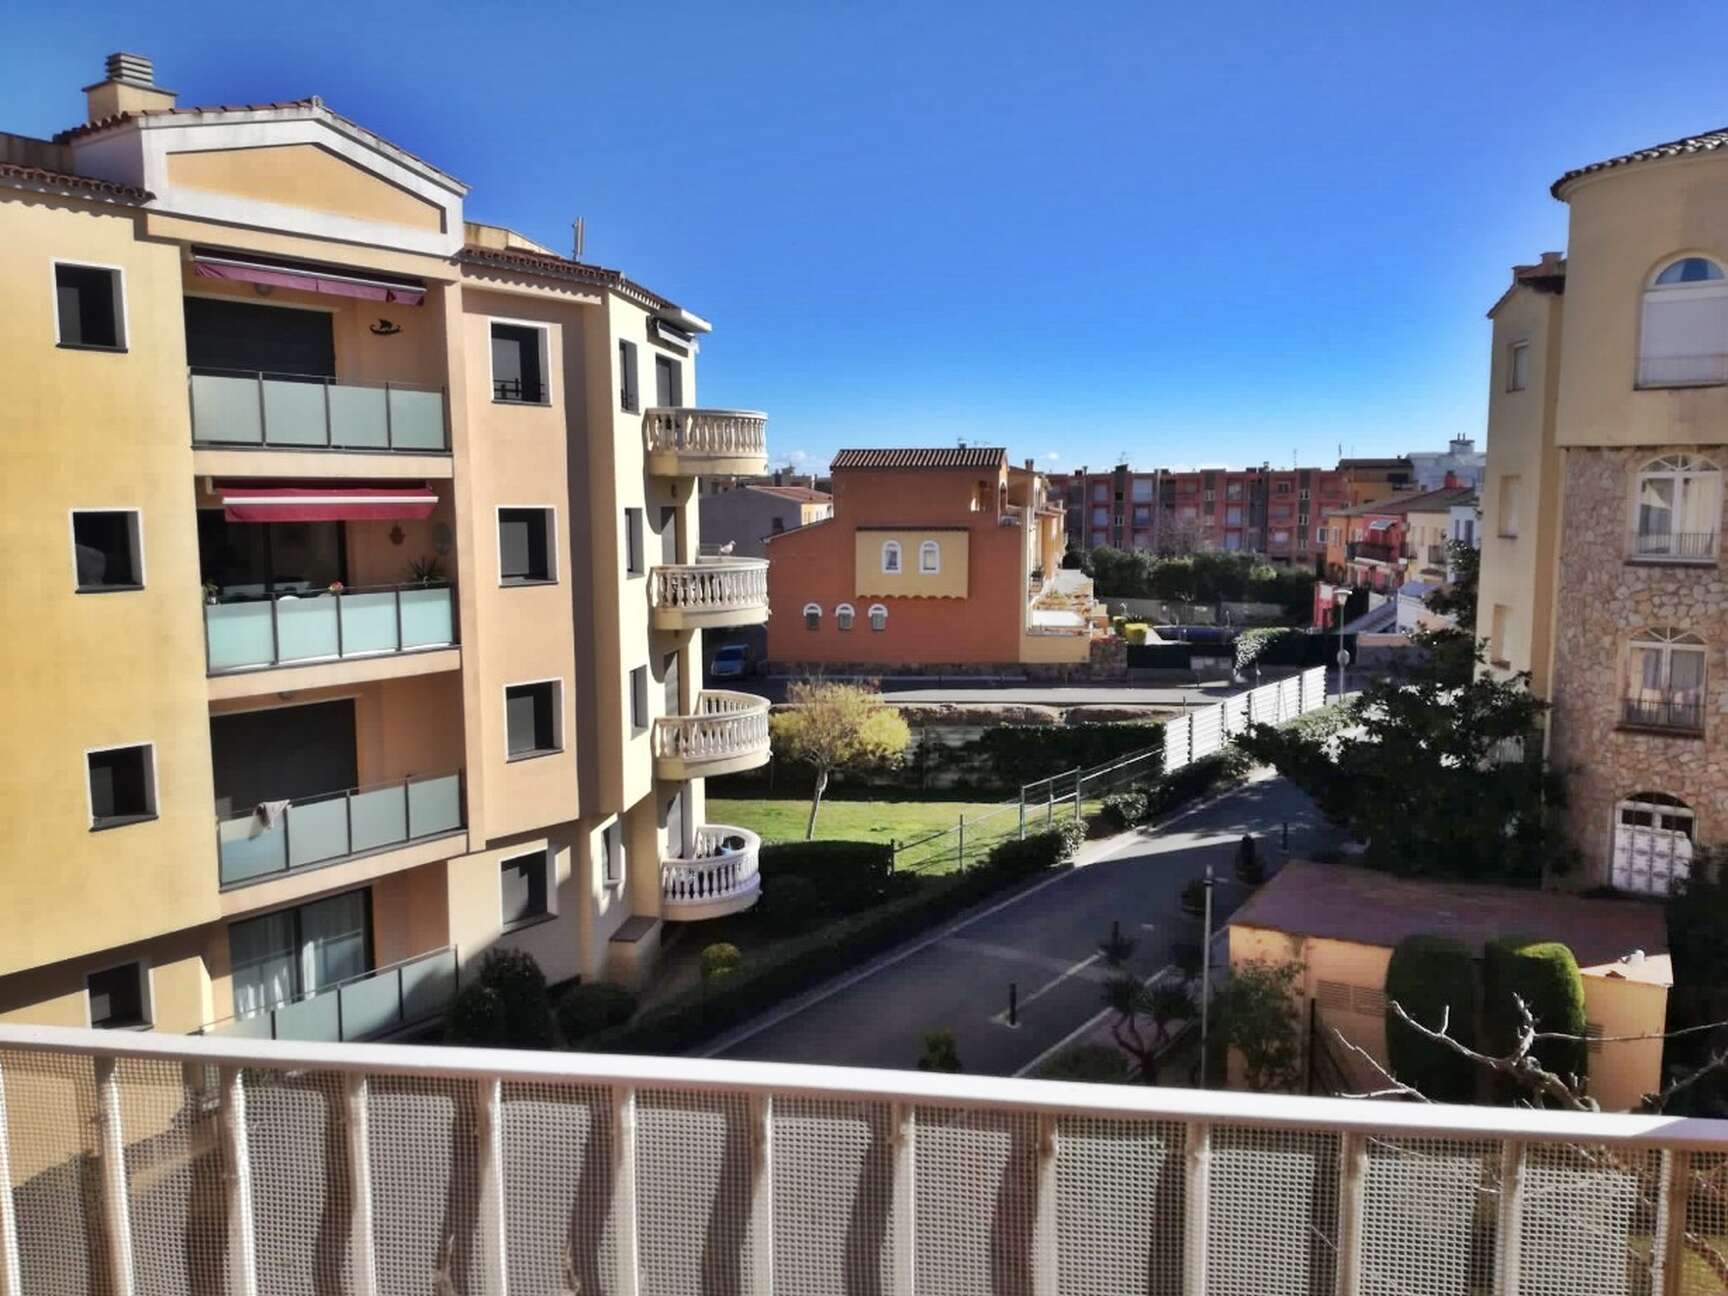 Flat 300 metres from the beach for sale in Empuriabrava.